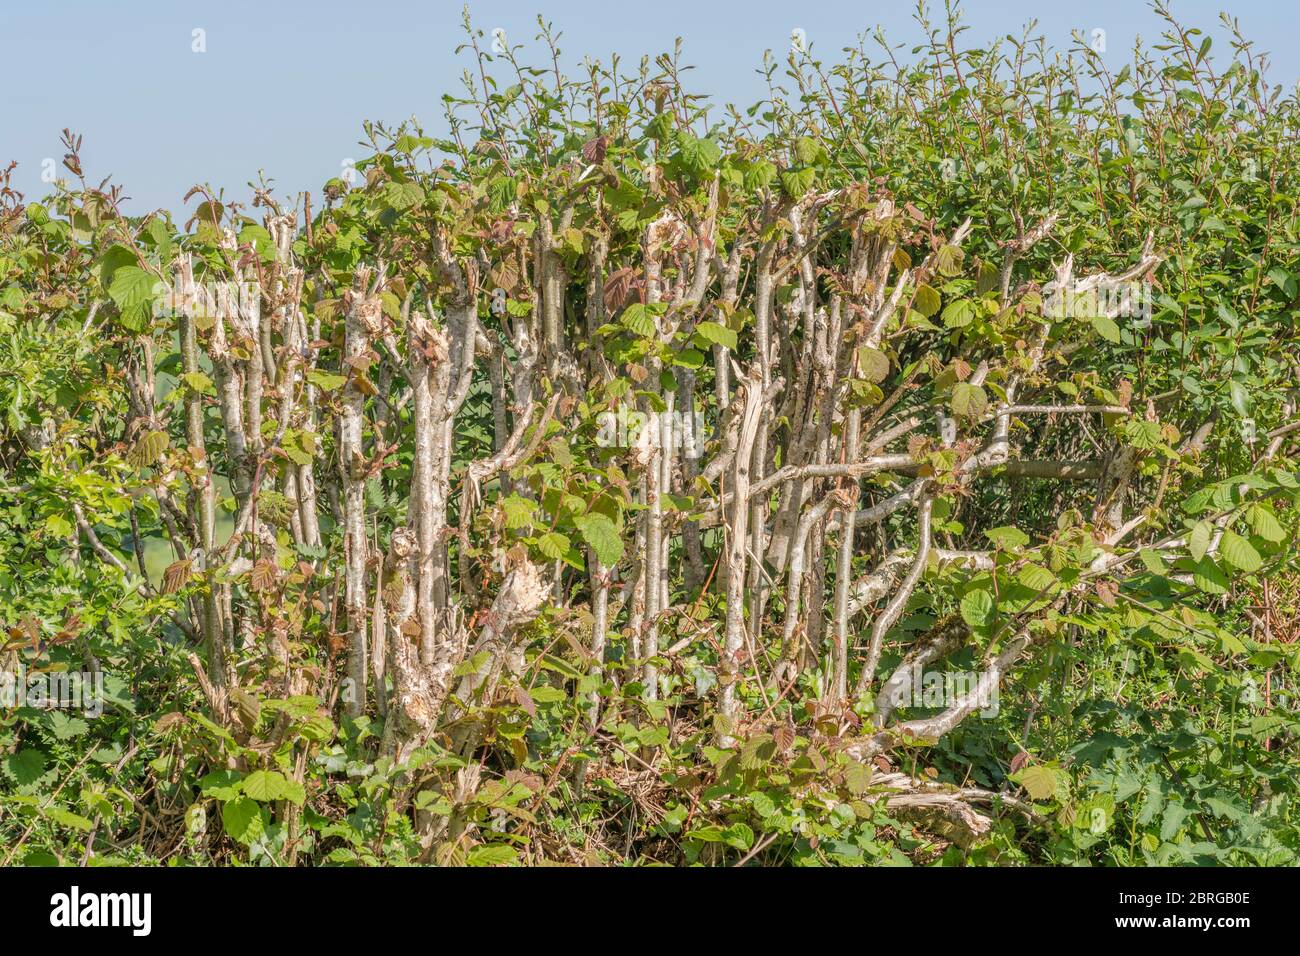 Example of mechanised hedge cutting with a flail, where smaller shrub & tree species branches are severed rather than cut by the flailing process. Stock Photo